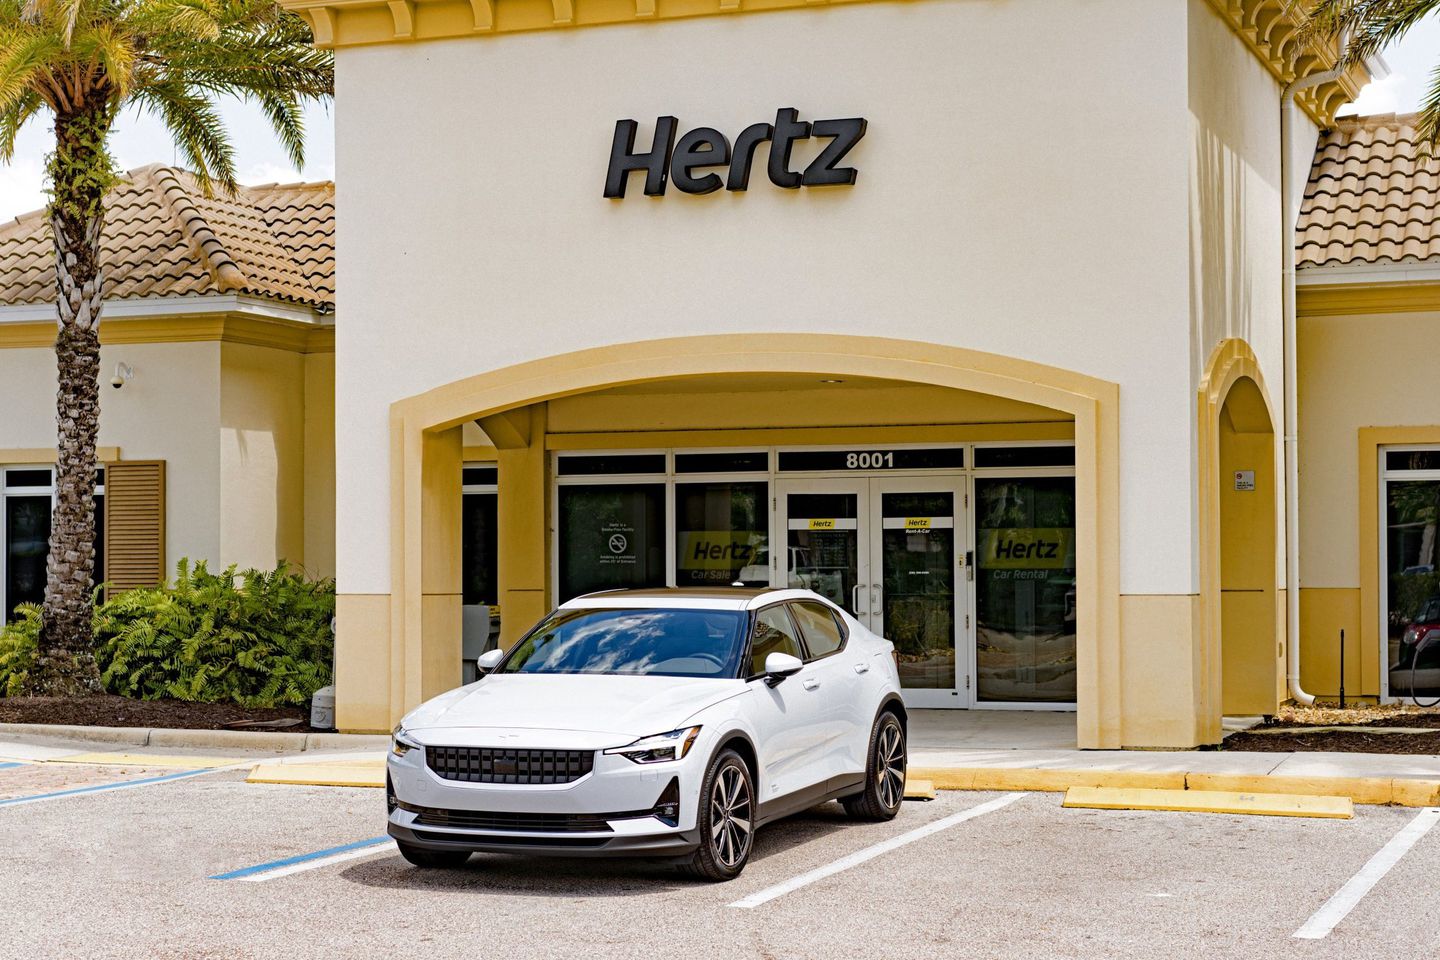 Hertz says it will purchase 65,000 electric vehicles from Polestar